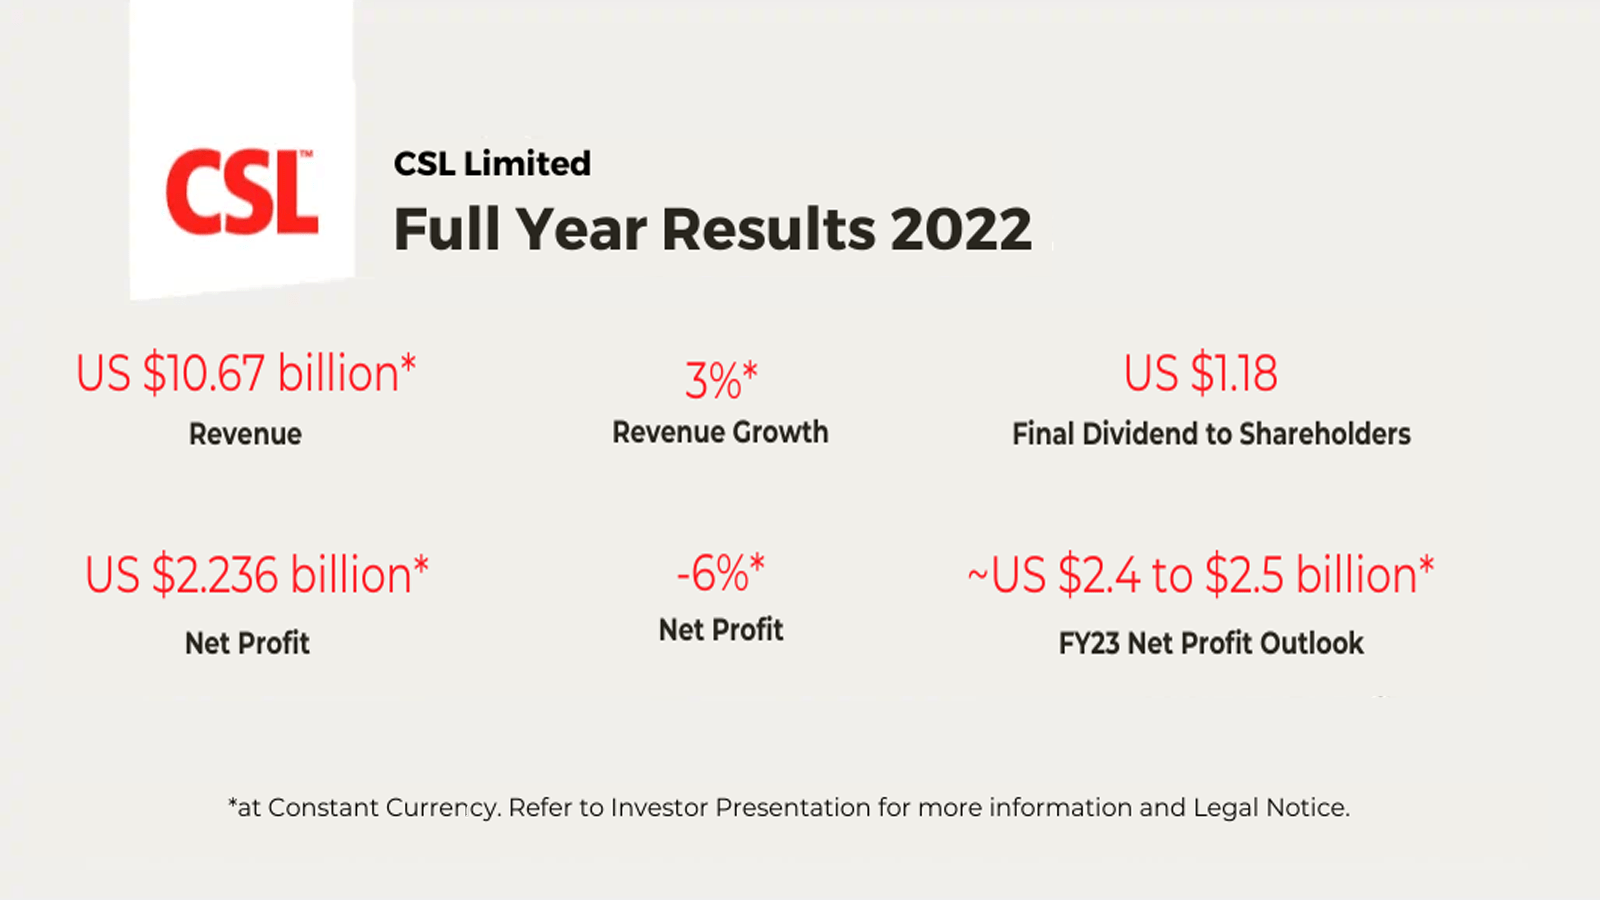 Graphic showing the 2022 Full Year Results of CSL Limited